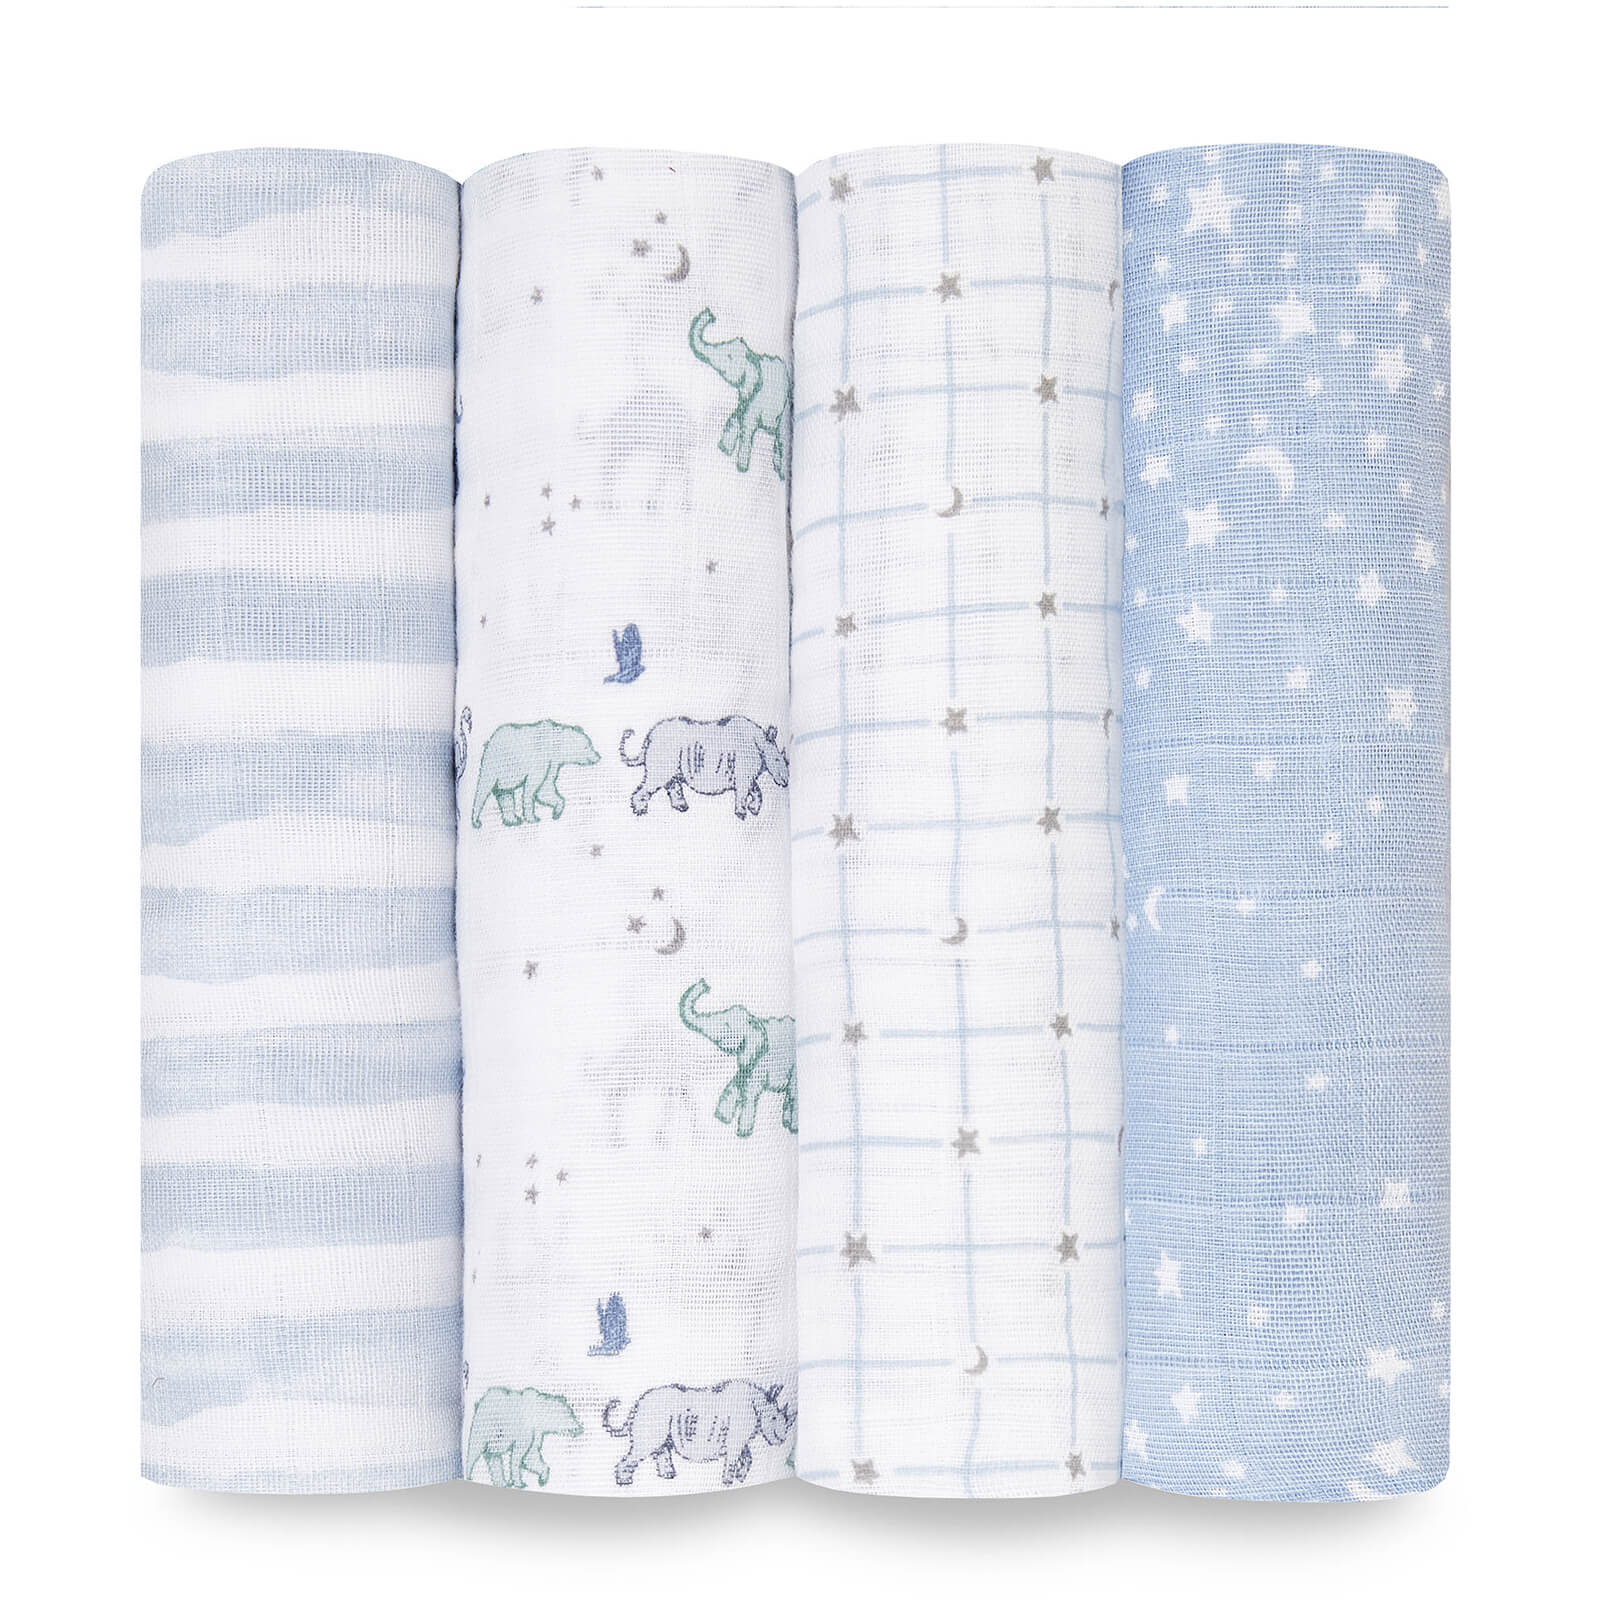 Aden + anais Swaddles - Rising Star (4 Pack)